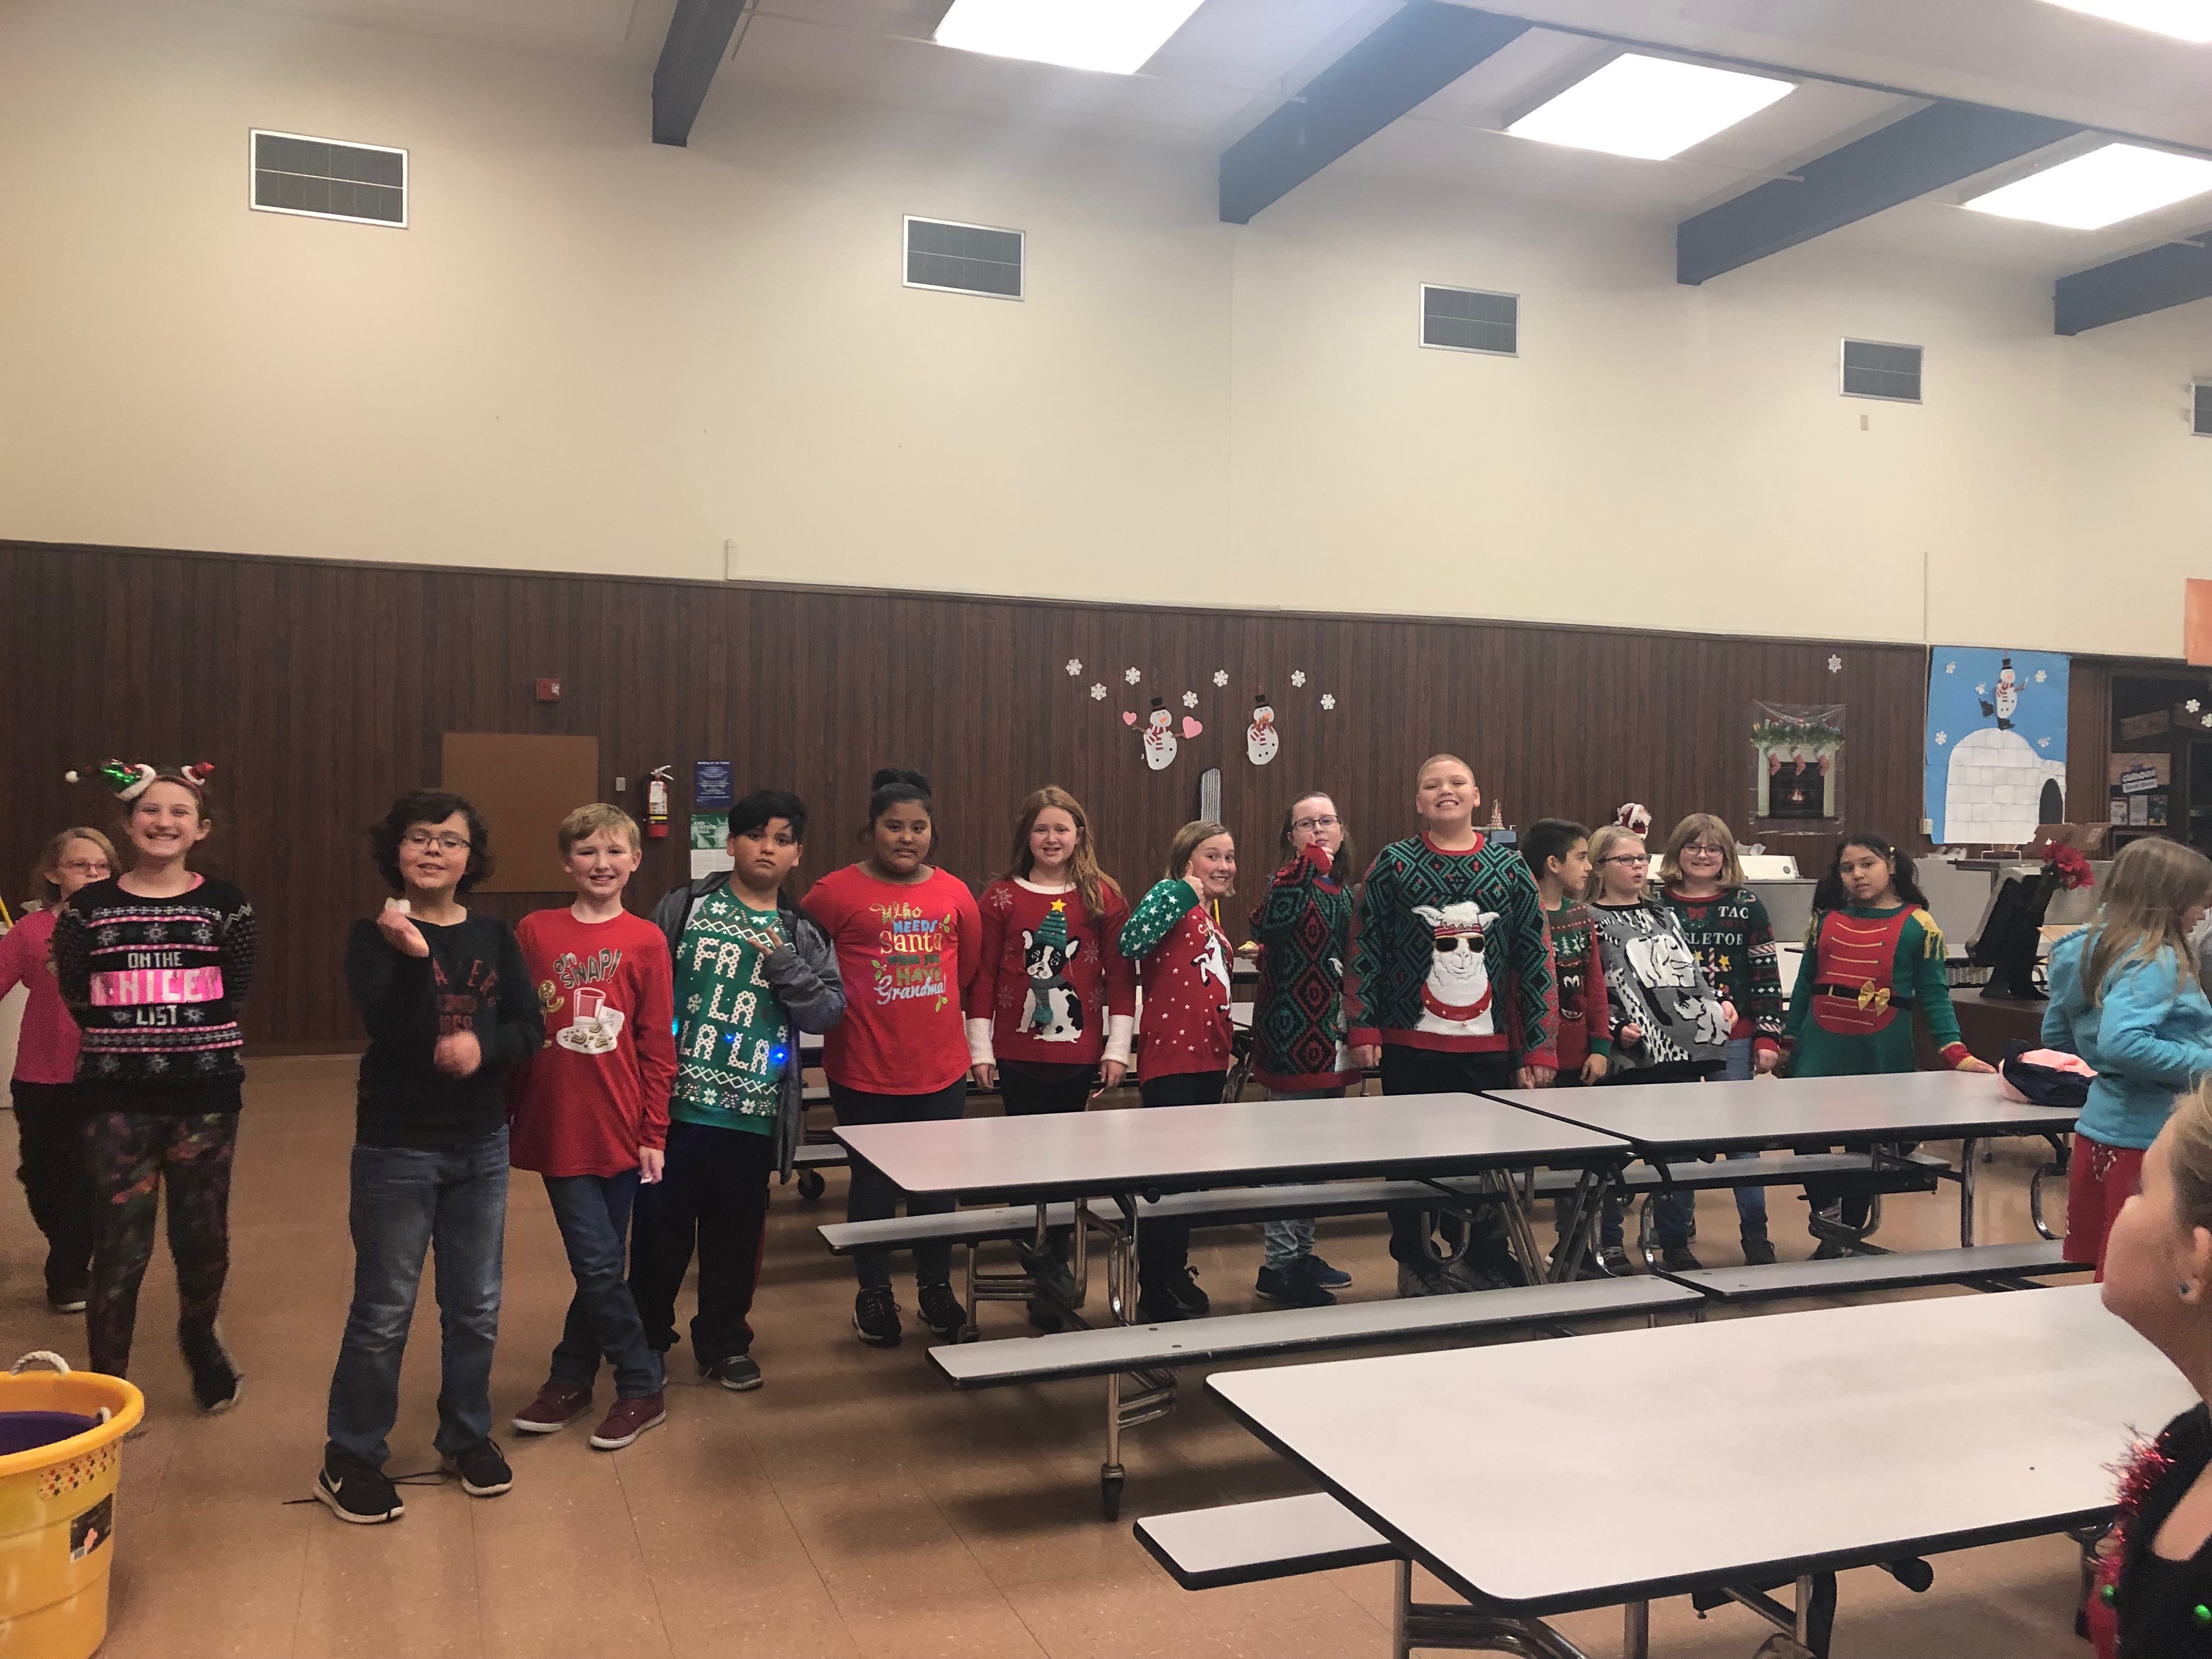 Students in ugly sweaters